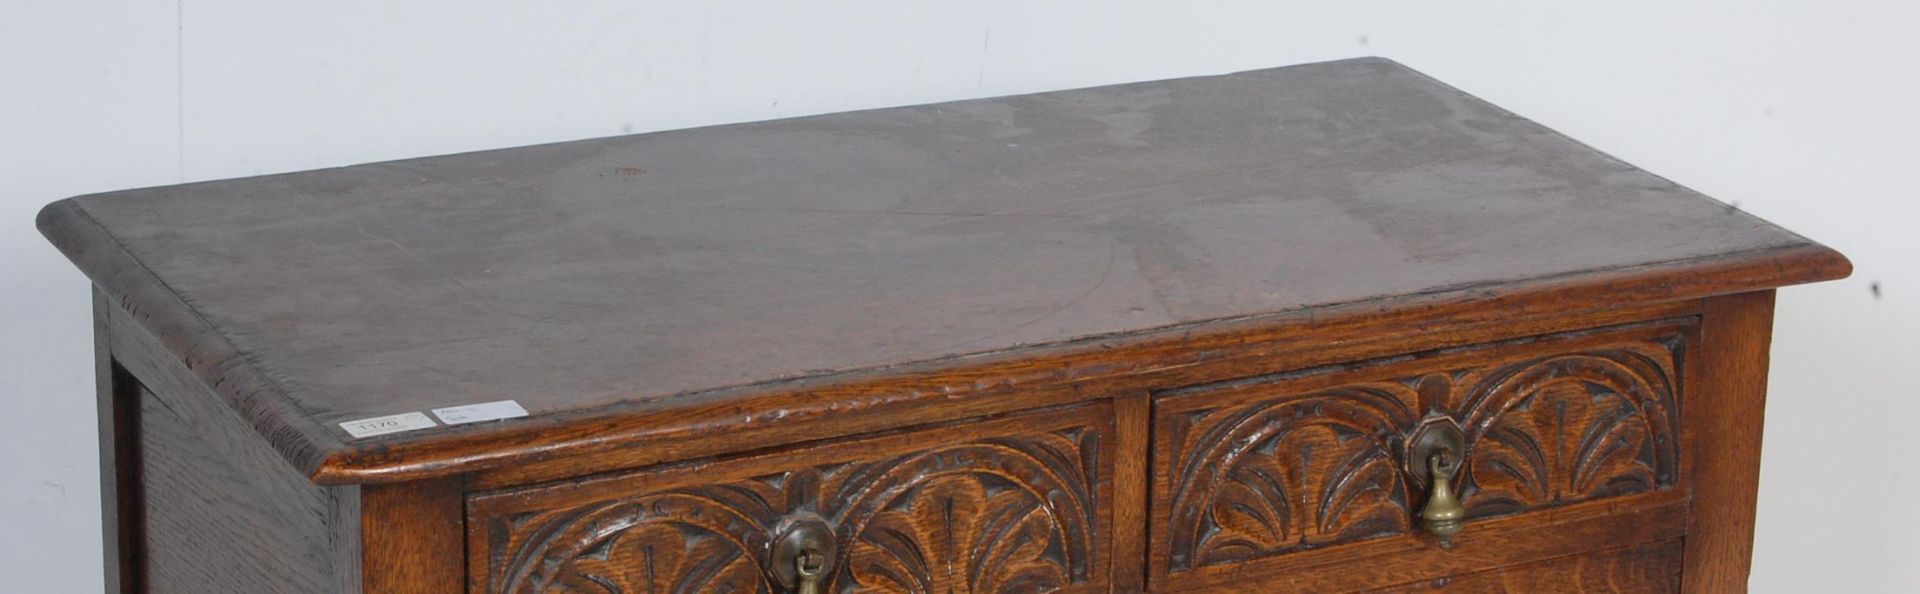 17TH CENTURY REVIVAL CARVED OAK CHEST OF DRAWERS - Image 2 of 6